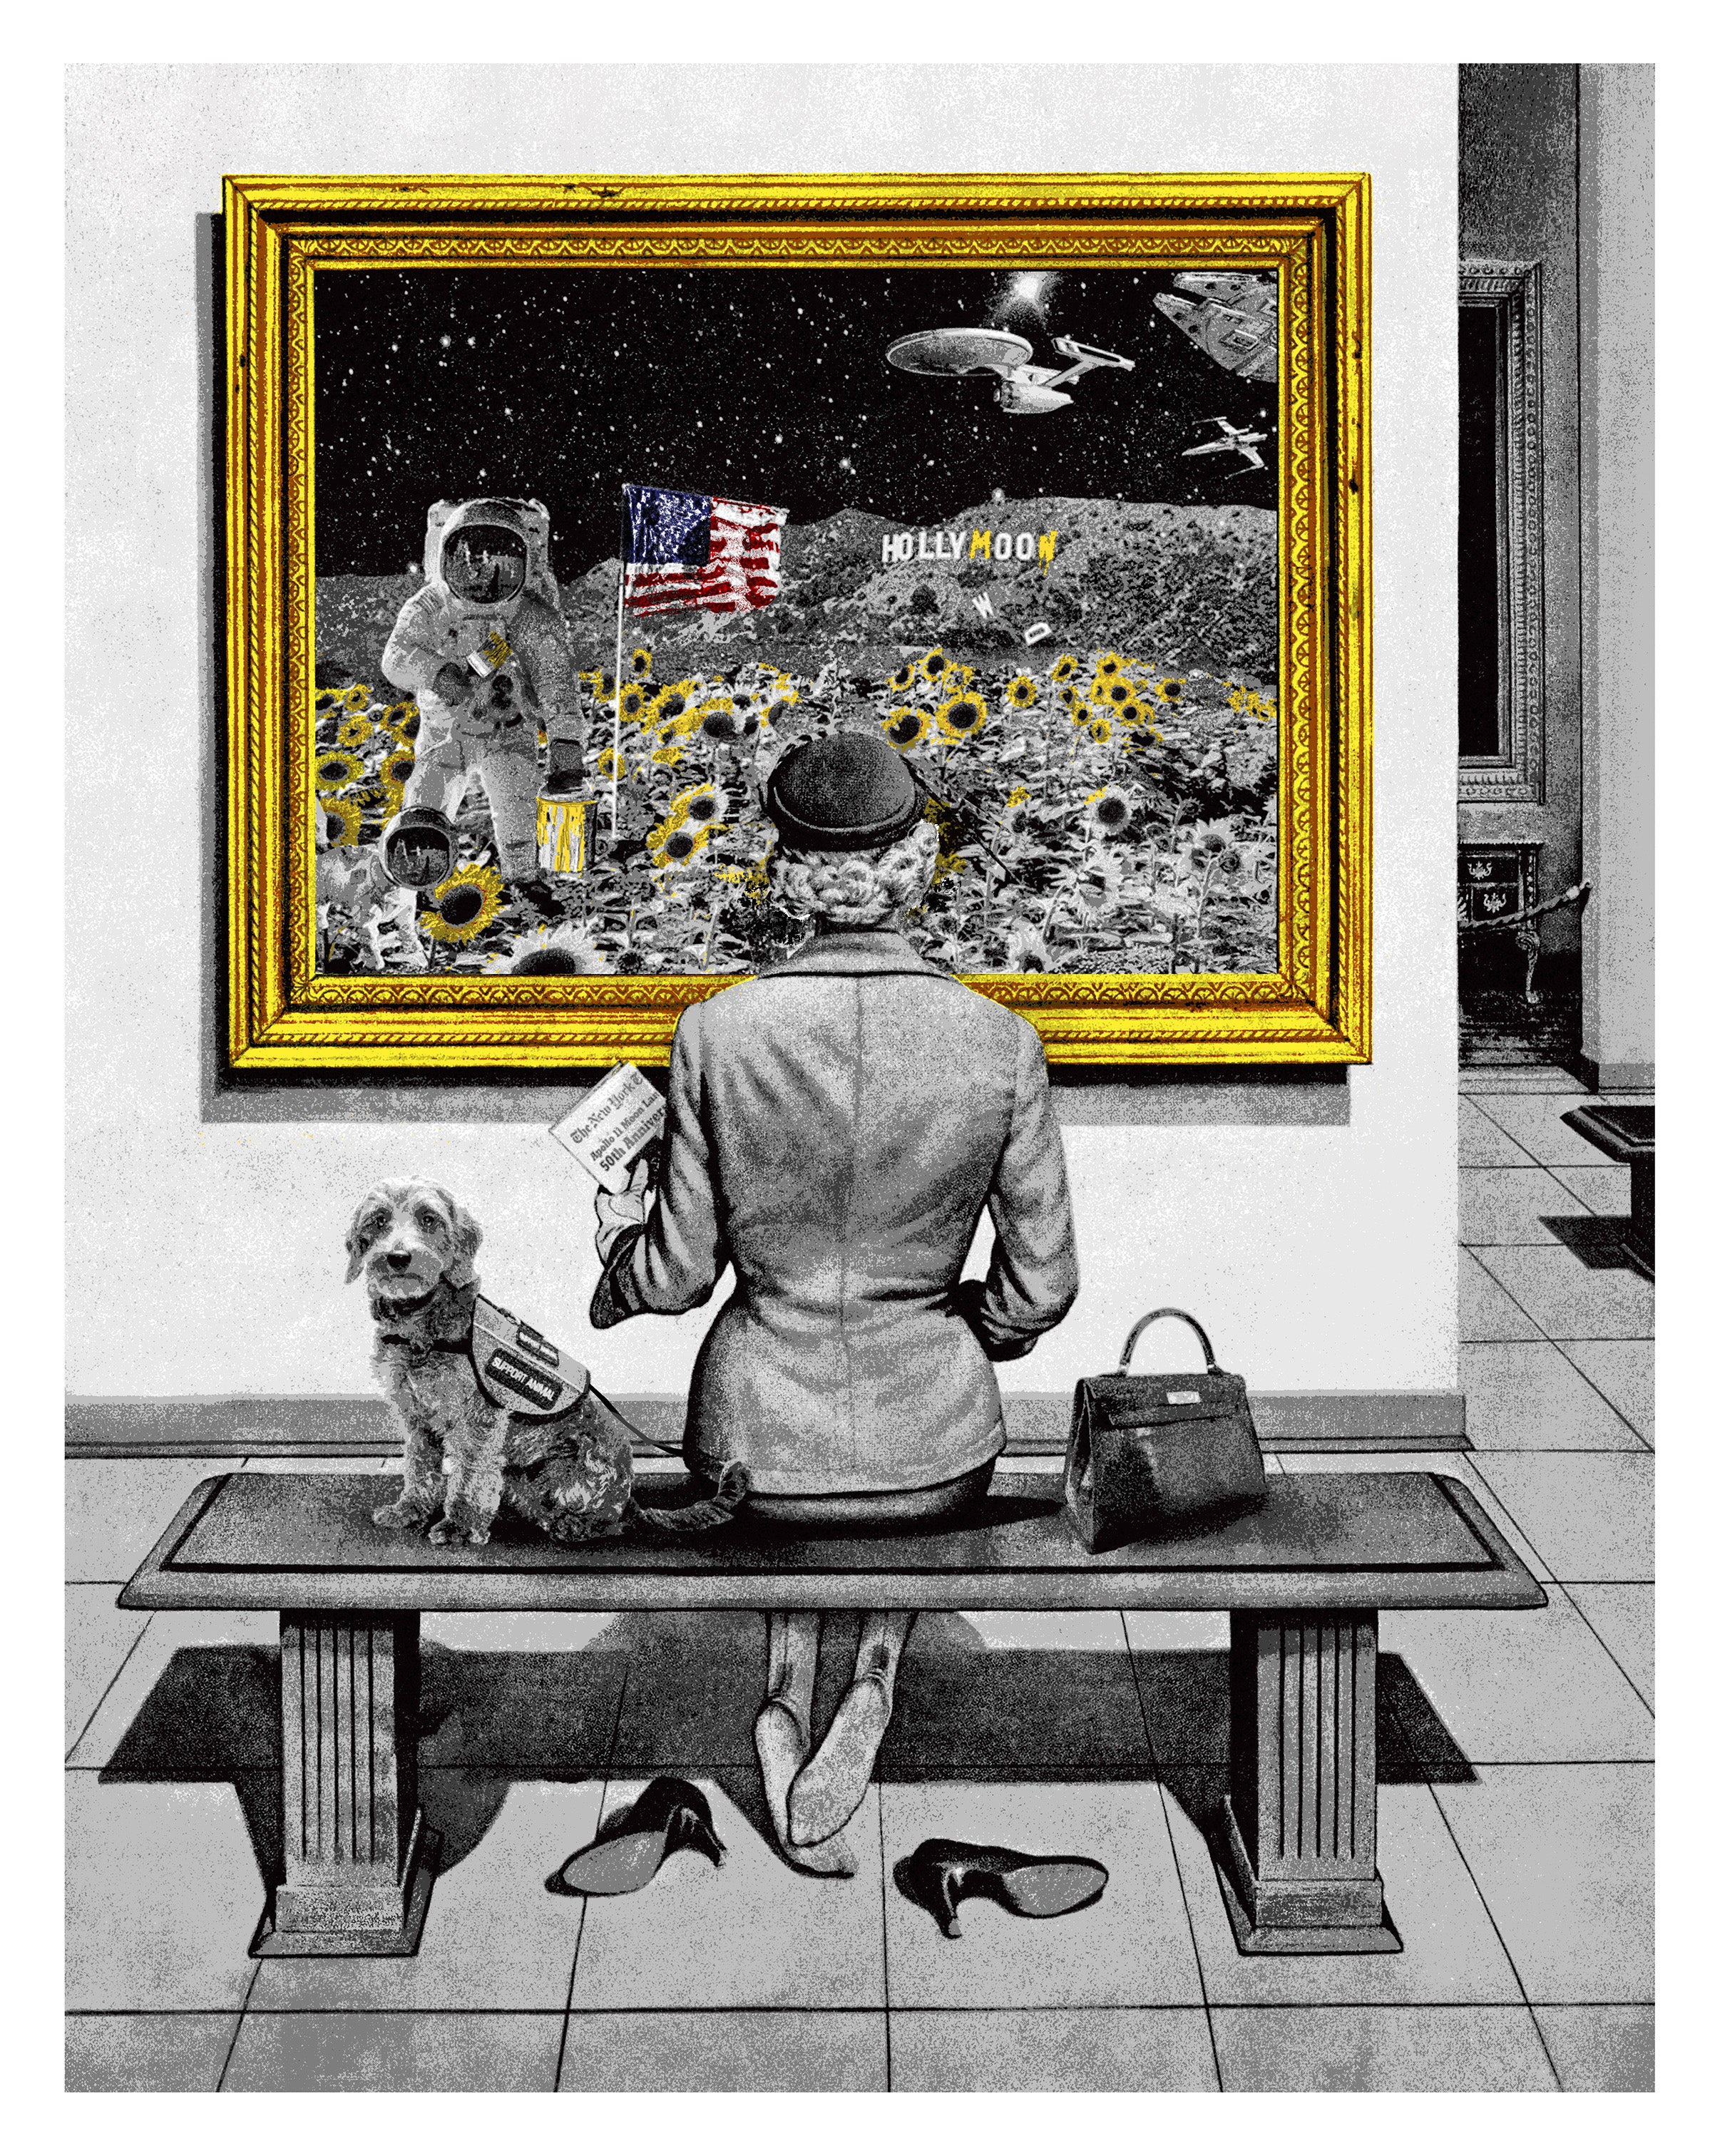 Title:  Hollymoon  Artist:  Mr. Brainwash  Edition:   In 1969, man first landed on the moon. Fifty years later, we celebrate this monument with a limited edition release of 50 total prints. The Apollo 11 landing is featured in this Hollymoon scene that sparks wonder for this testament to space travel.  This version is the standard edition of 50, 8 colors and is signed and numbered with a thumbprint on the back.  Type:  8 color screen print on archival art paper  Size:   33.5" x 42"